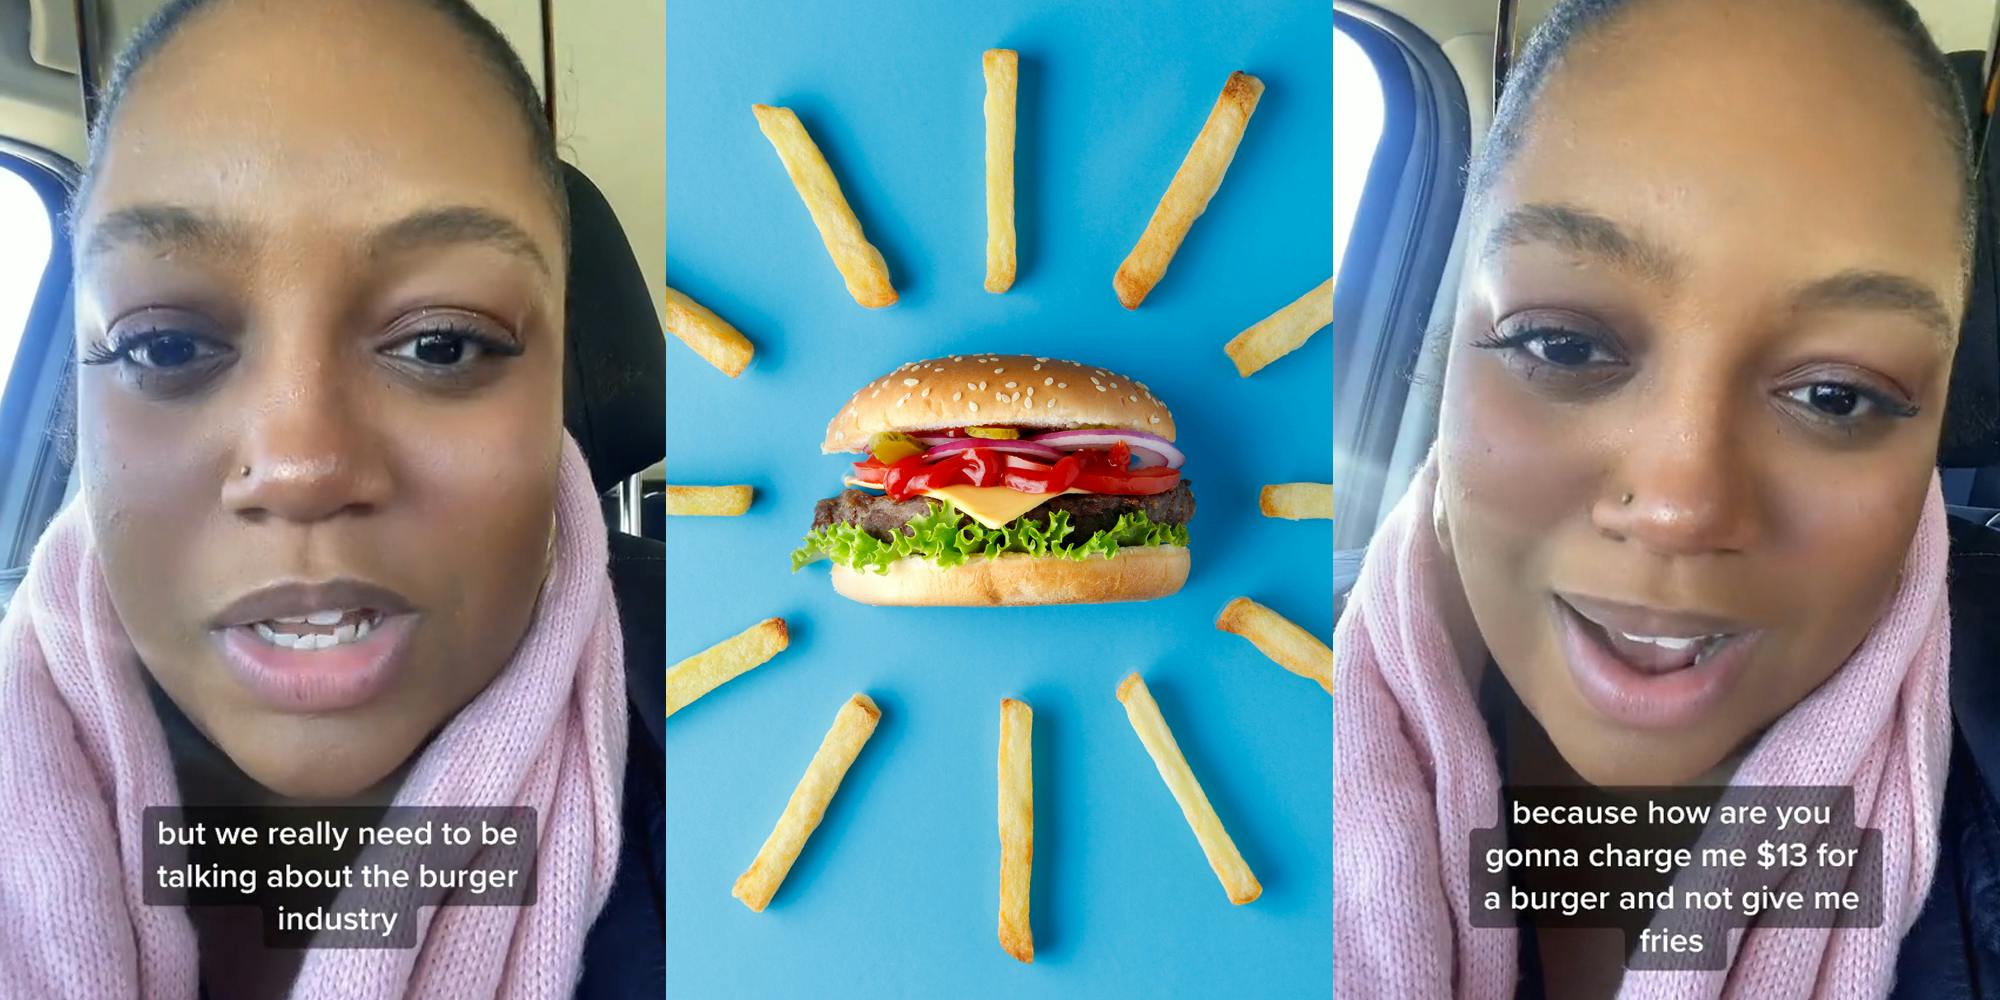 person speaking in car with caption "but we really need to be talking about the burger industry" (l) burger with fries around on blue background (c) person speaking in car with caption "because how are you gonna charge me $13 for a burger and not give me fries" (r)